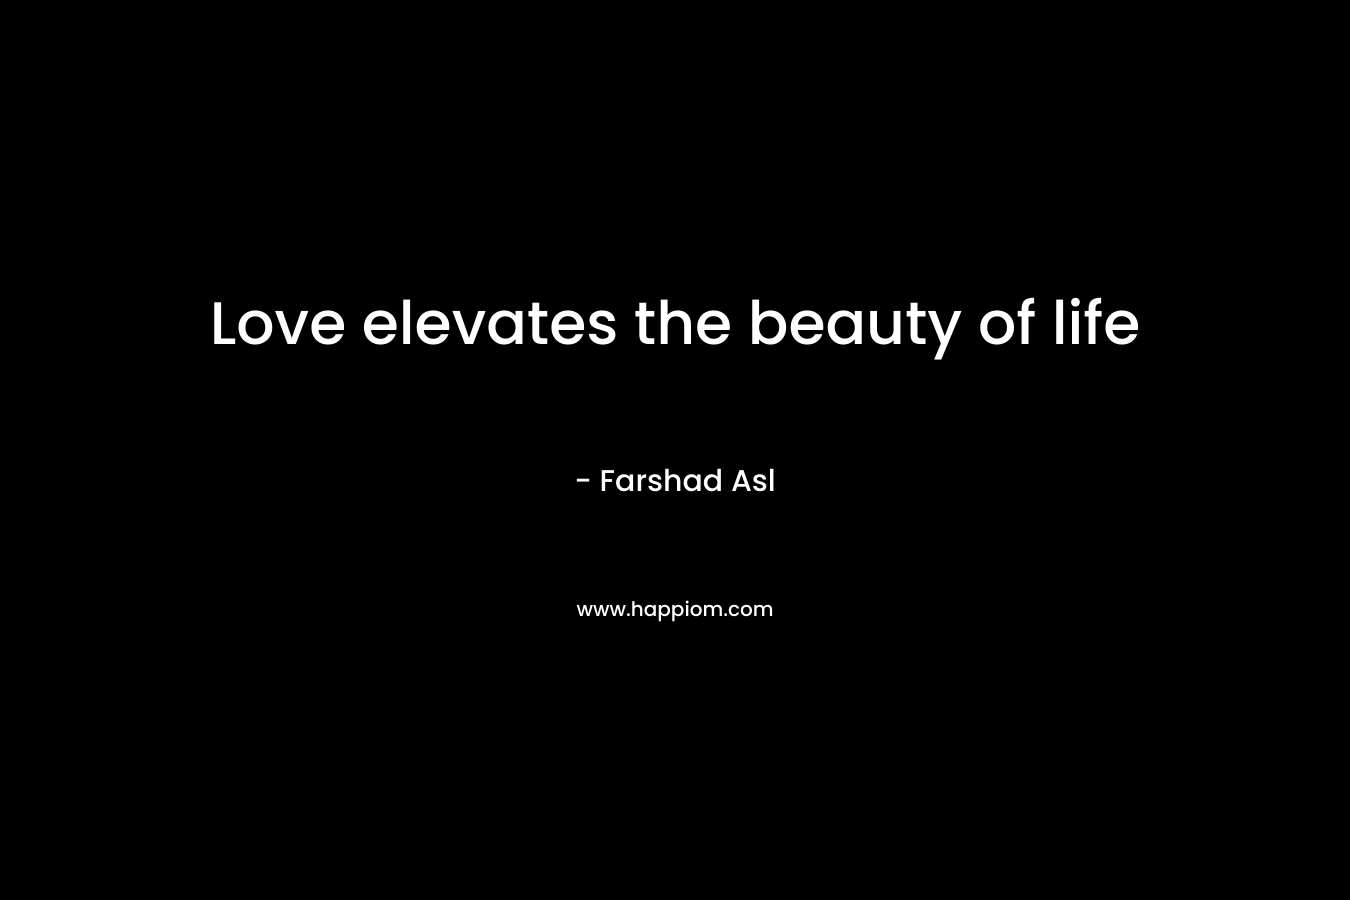 Love elevates the beauty of life